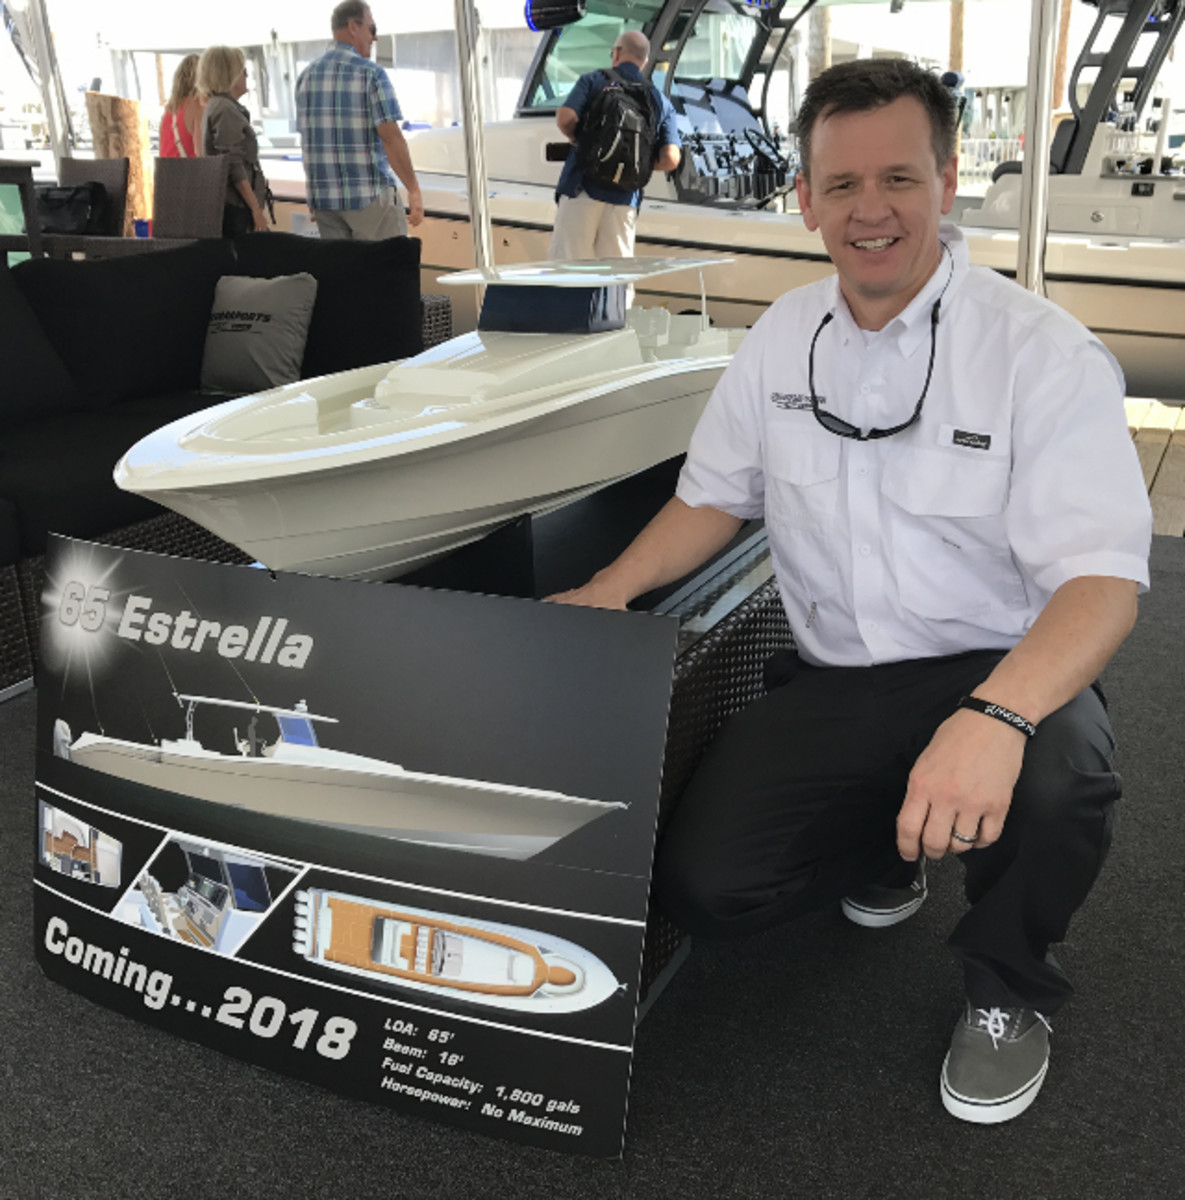 HydraSports Custom director of engineering Kurt Bergstrom said the new 65 Estrella center console will debut in about a year.